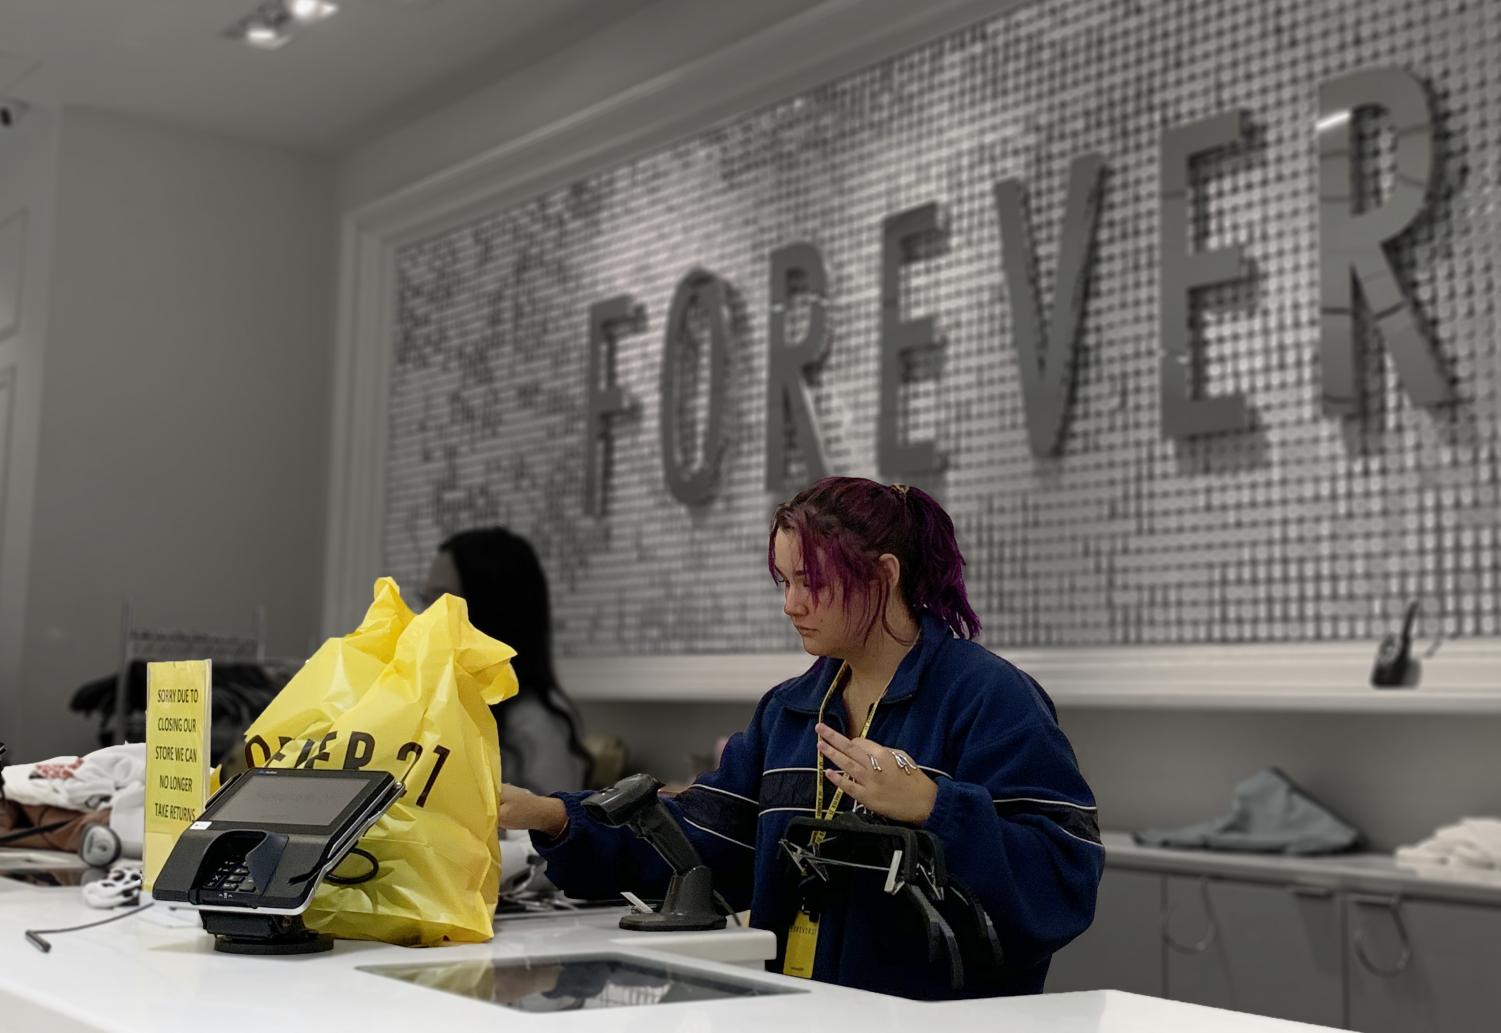 Forever 21 at Outlets of Des Moines may close fast fashion